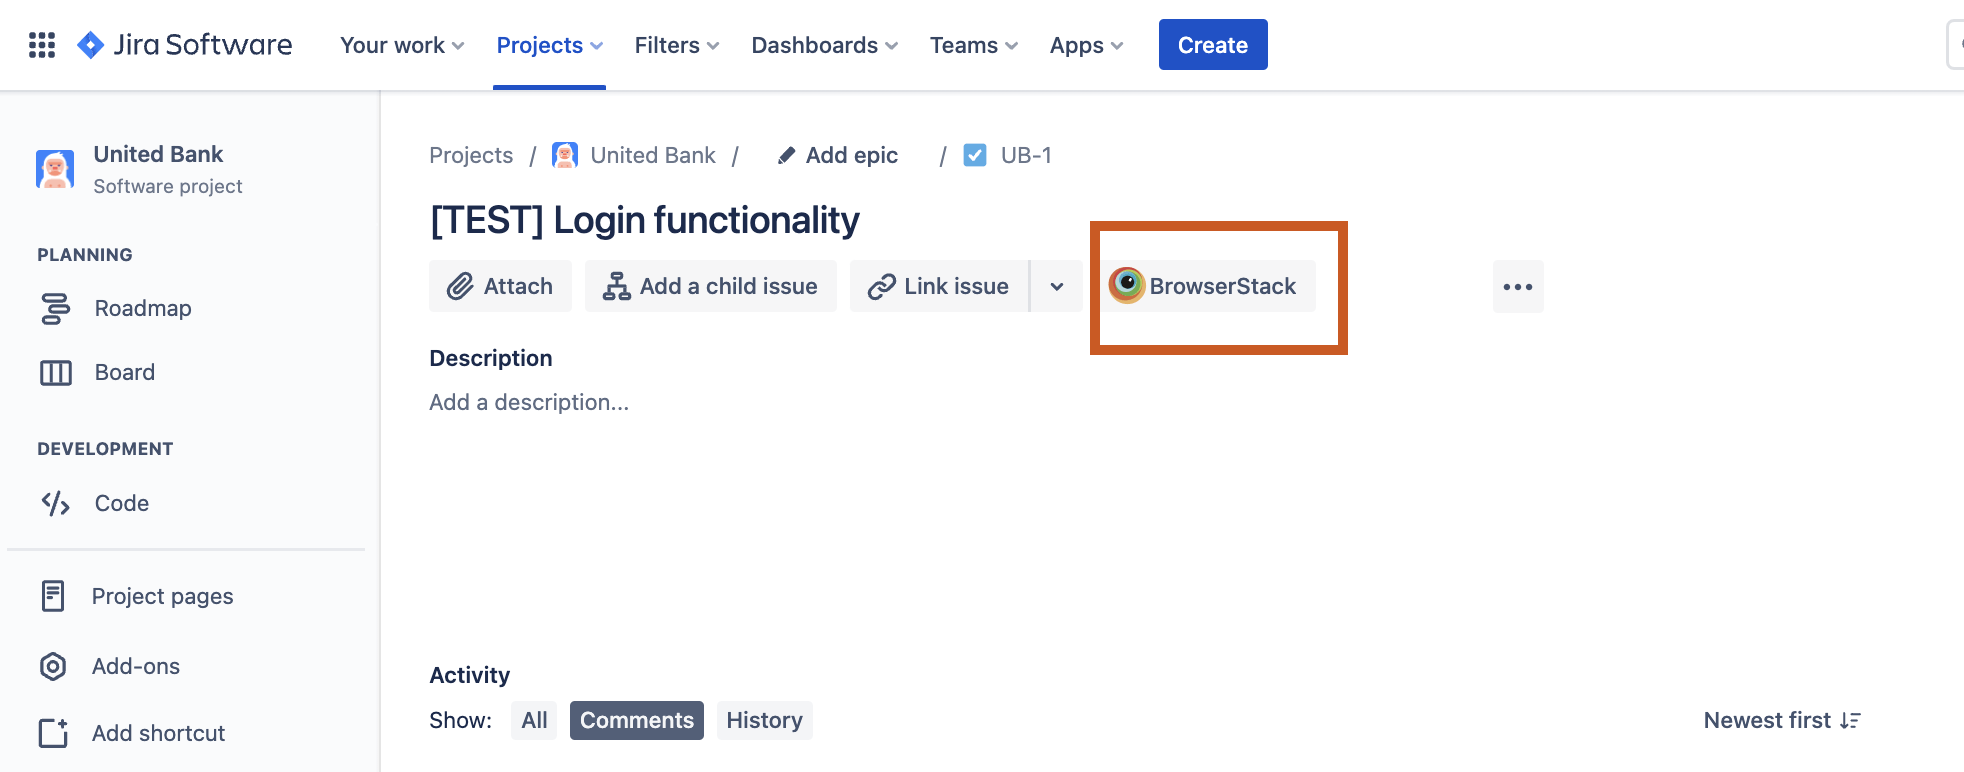 Install BrowserStack app from Atlassian Marketplace